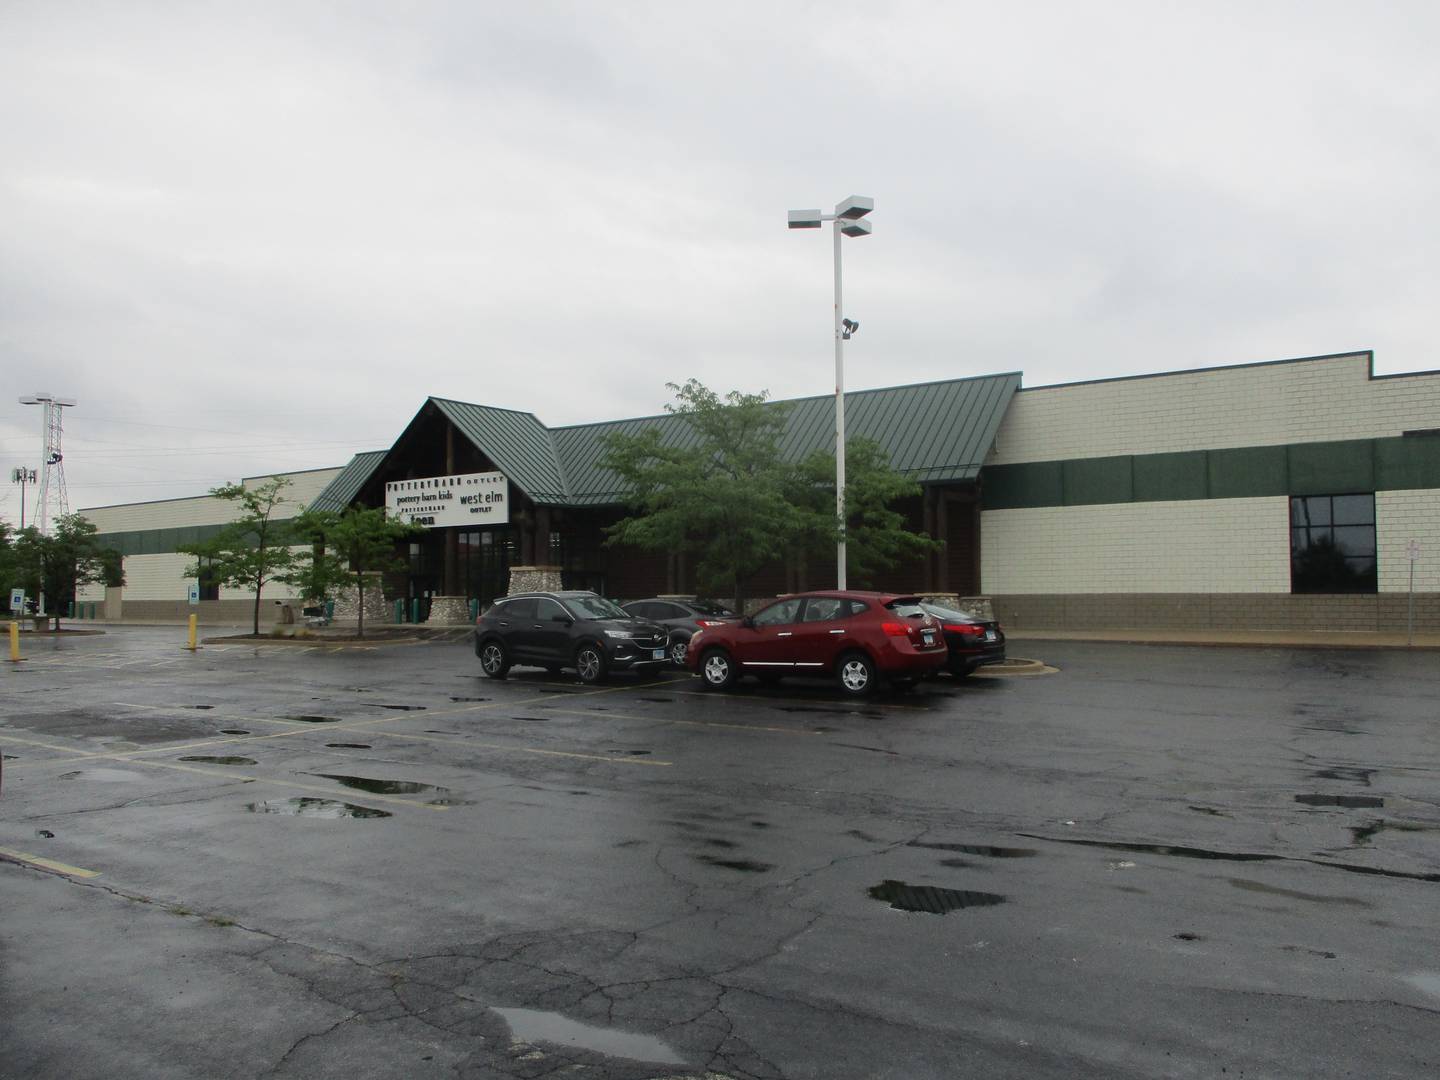 Rehan Motors plans to use the former Gander Mountain store in Joliet, seen here in July 2022, as a showroom for at least 100 vehicles.